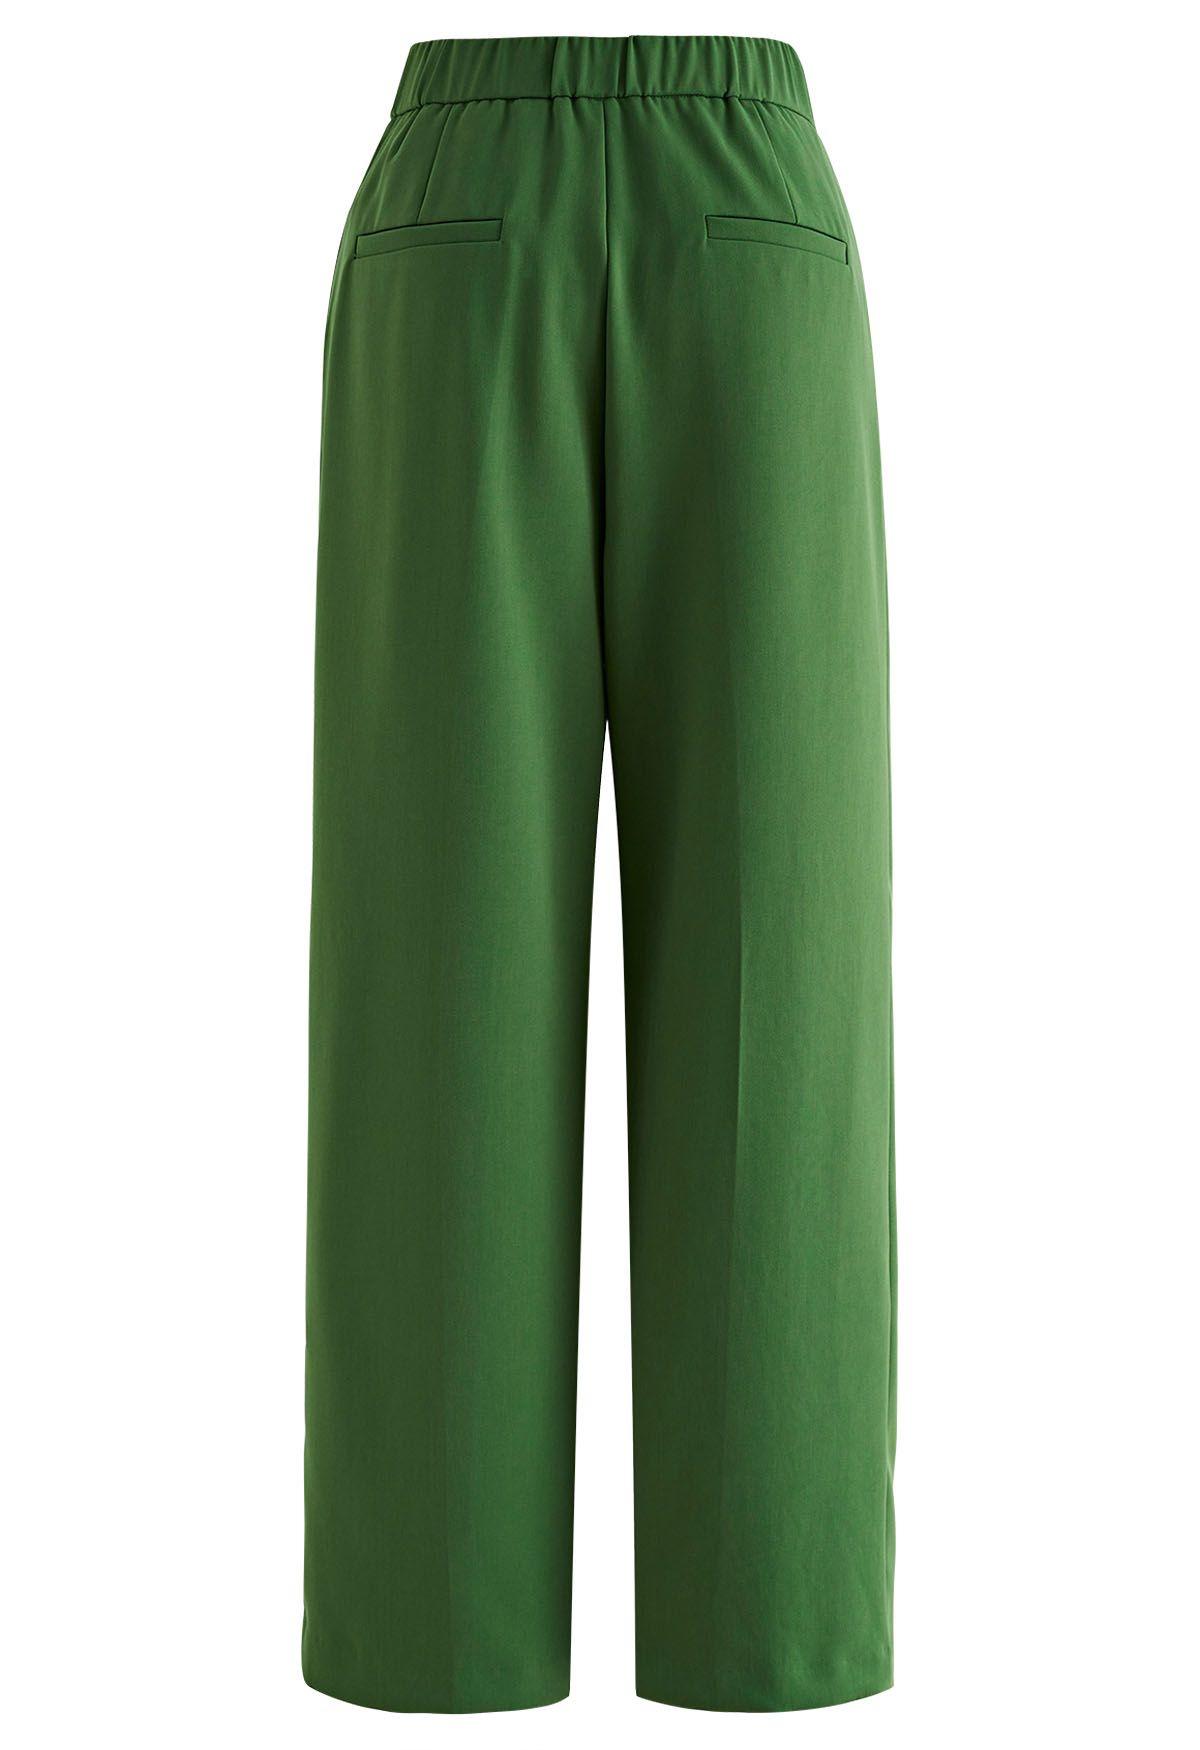 Simple Pleat Straight-Leg Pants in Green - Retro, Indie and Unique Fashion